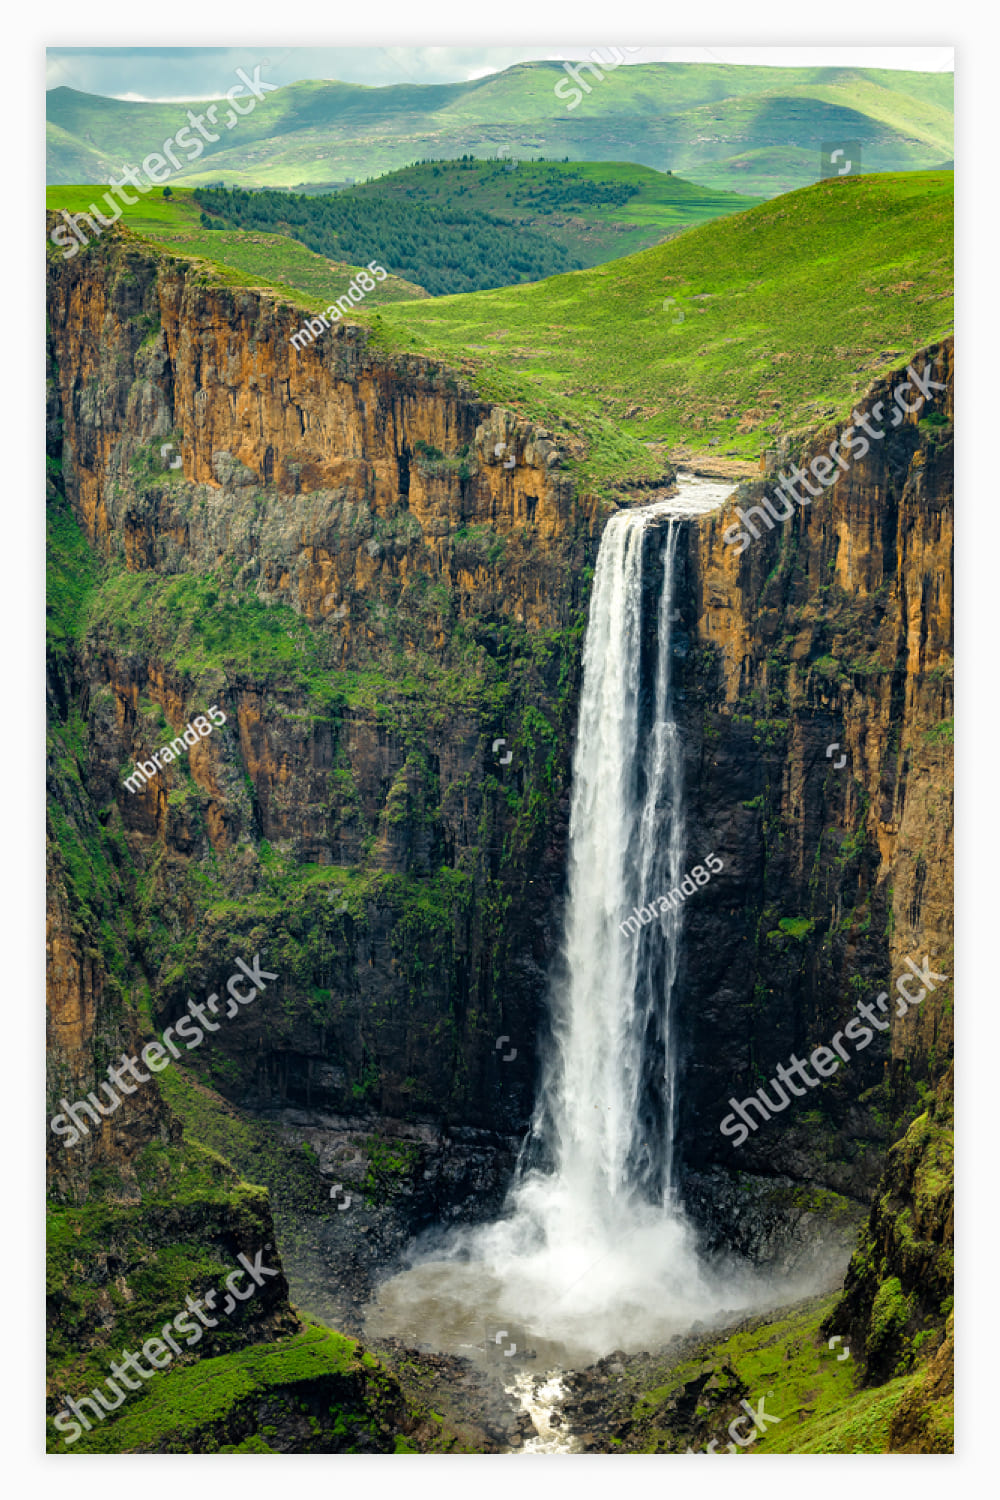 Maletsunyane Falls in Lesotho Africa. Most beautiful waterfall in the world.